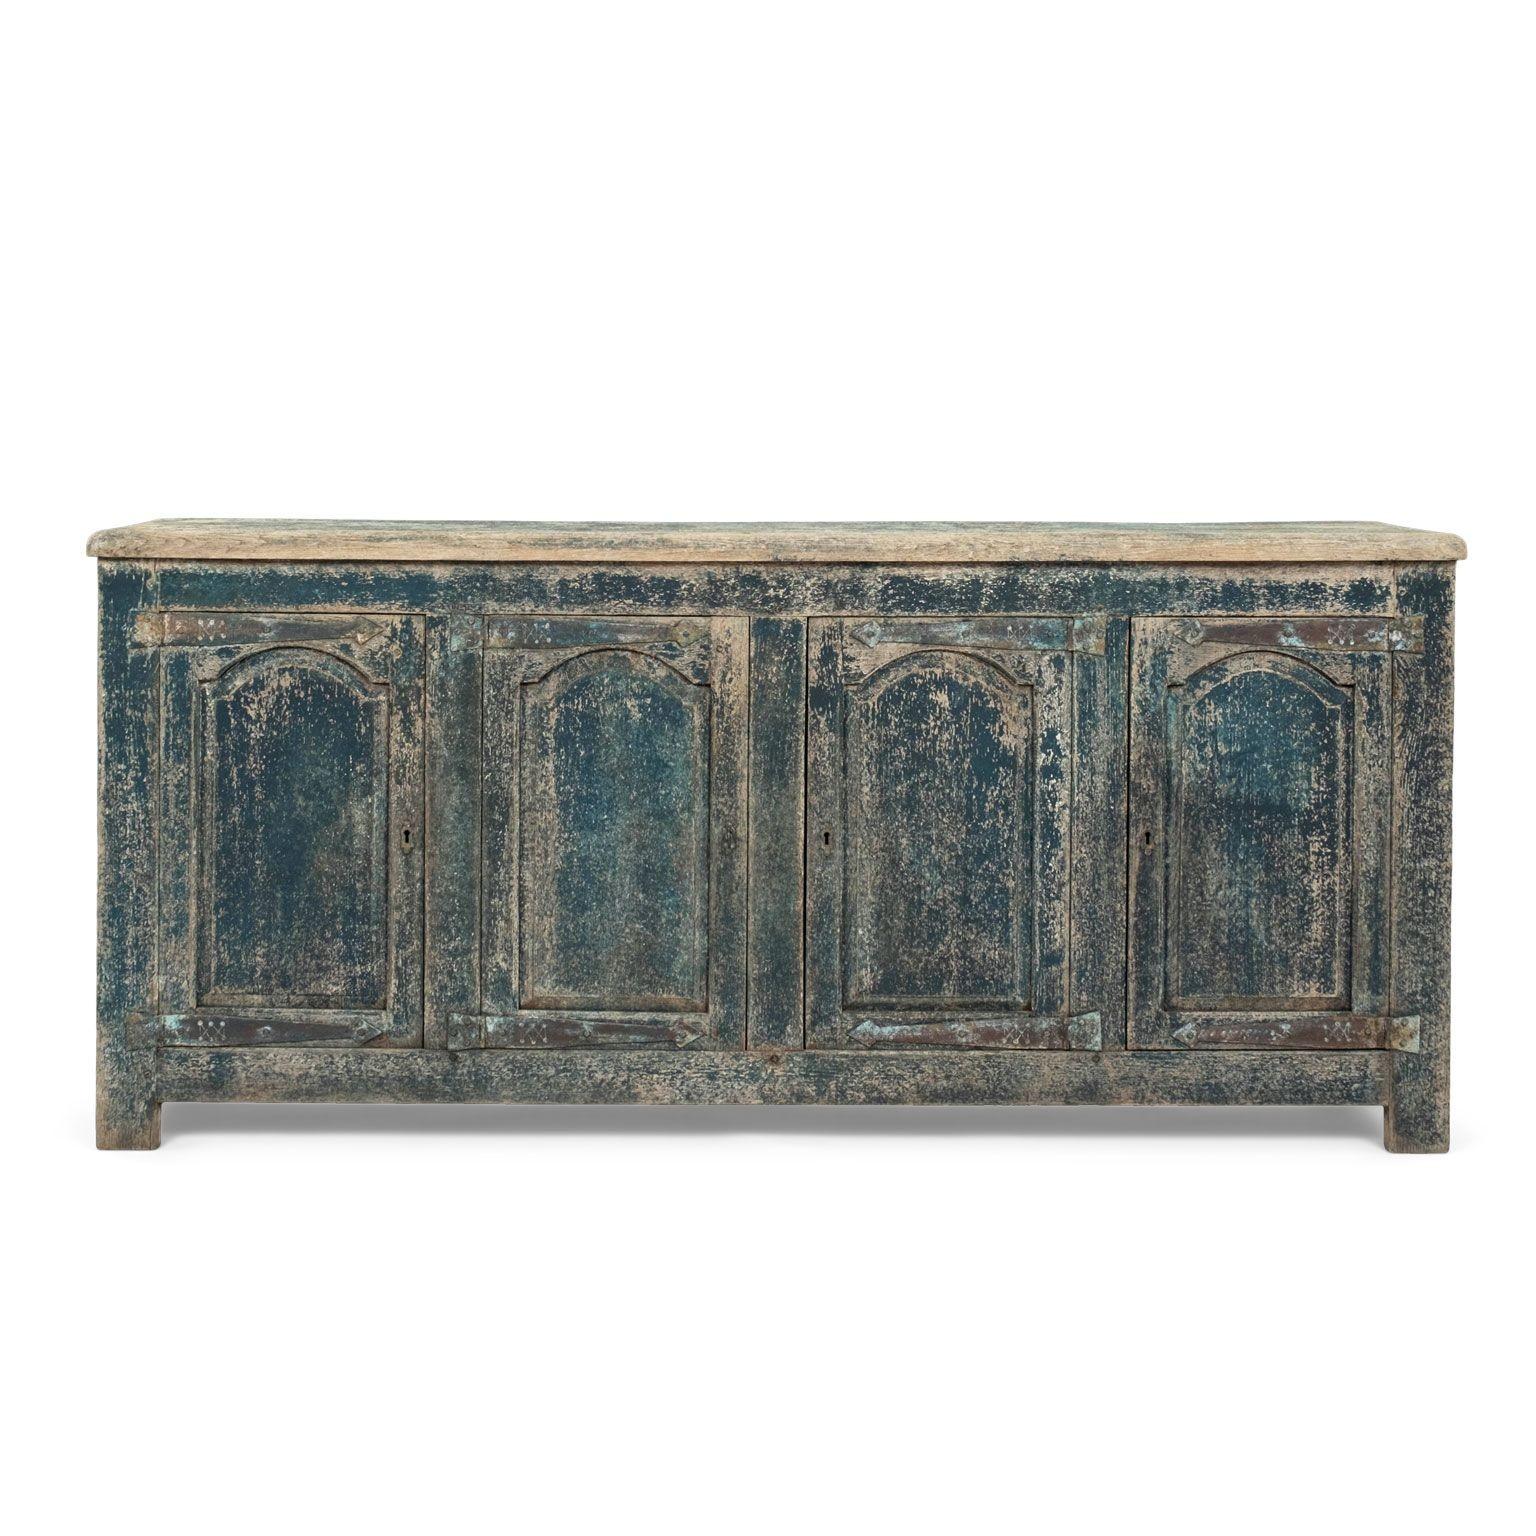 Early blue-painted four-door French enfilade circa 1700. Mortise and tenon construction. Deep, finely carved door panels. Thick plank top. Heavy iron hinges. Sturdy, stable.